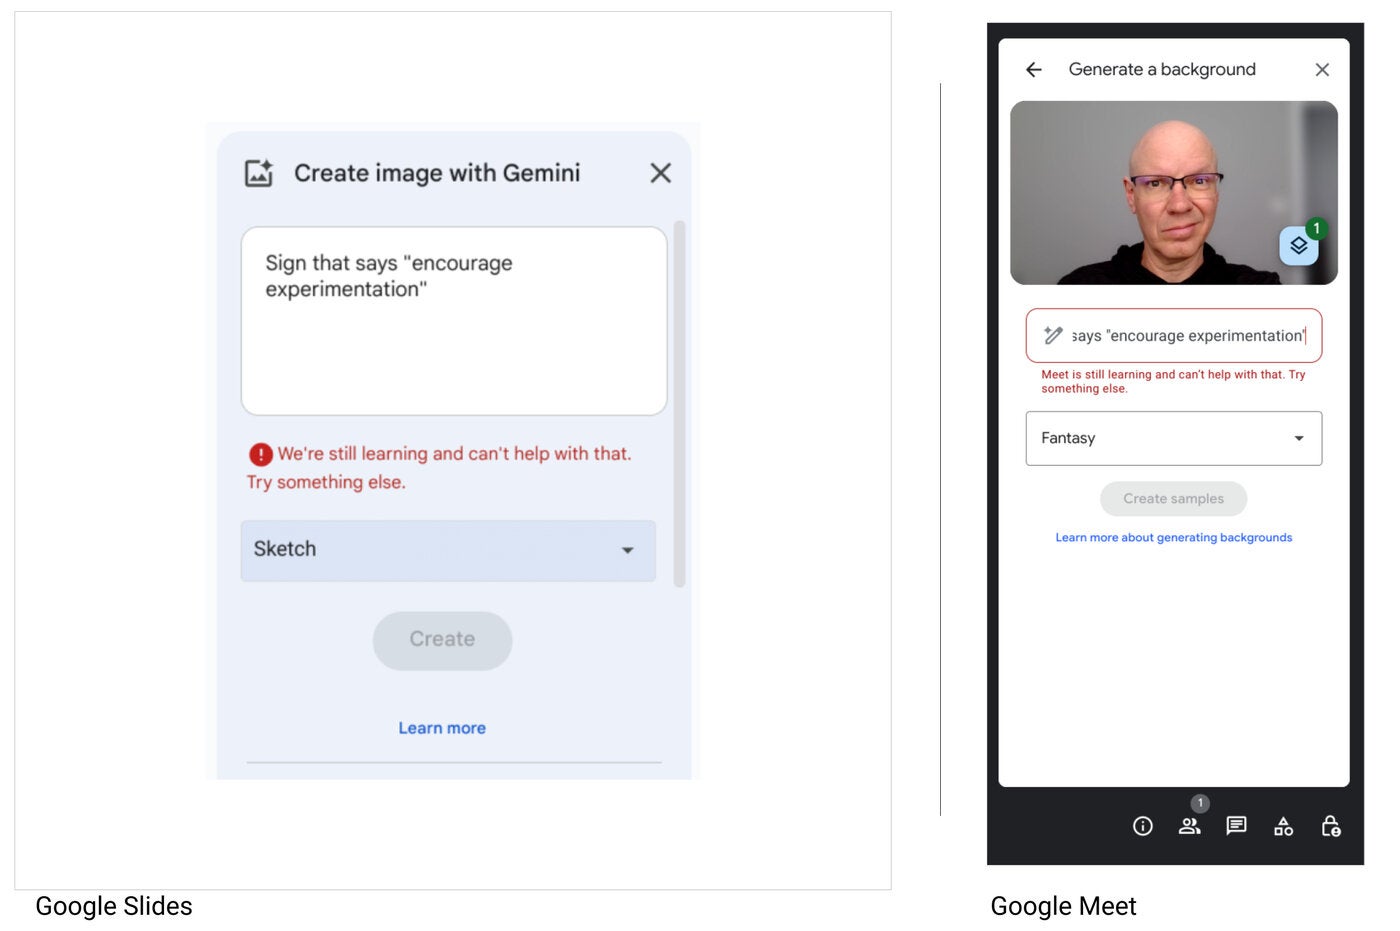 As of March 2024, Gemini refuses to generate banners with text in both Google Slides (left) and Google Meet (right).